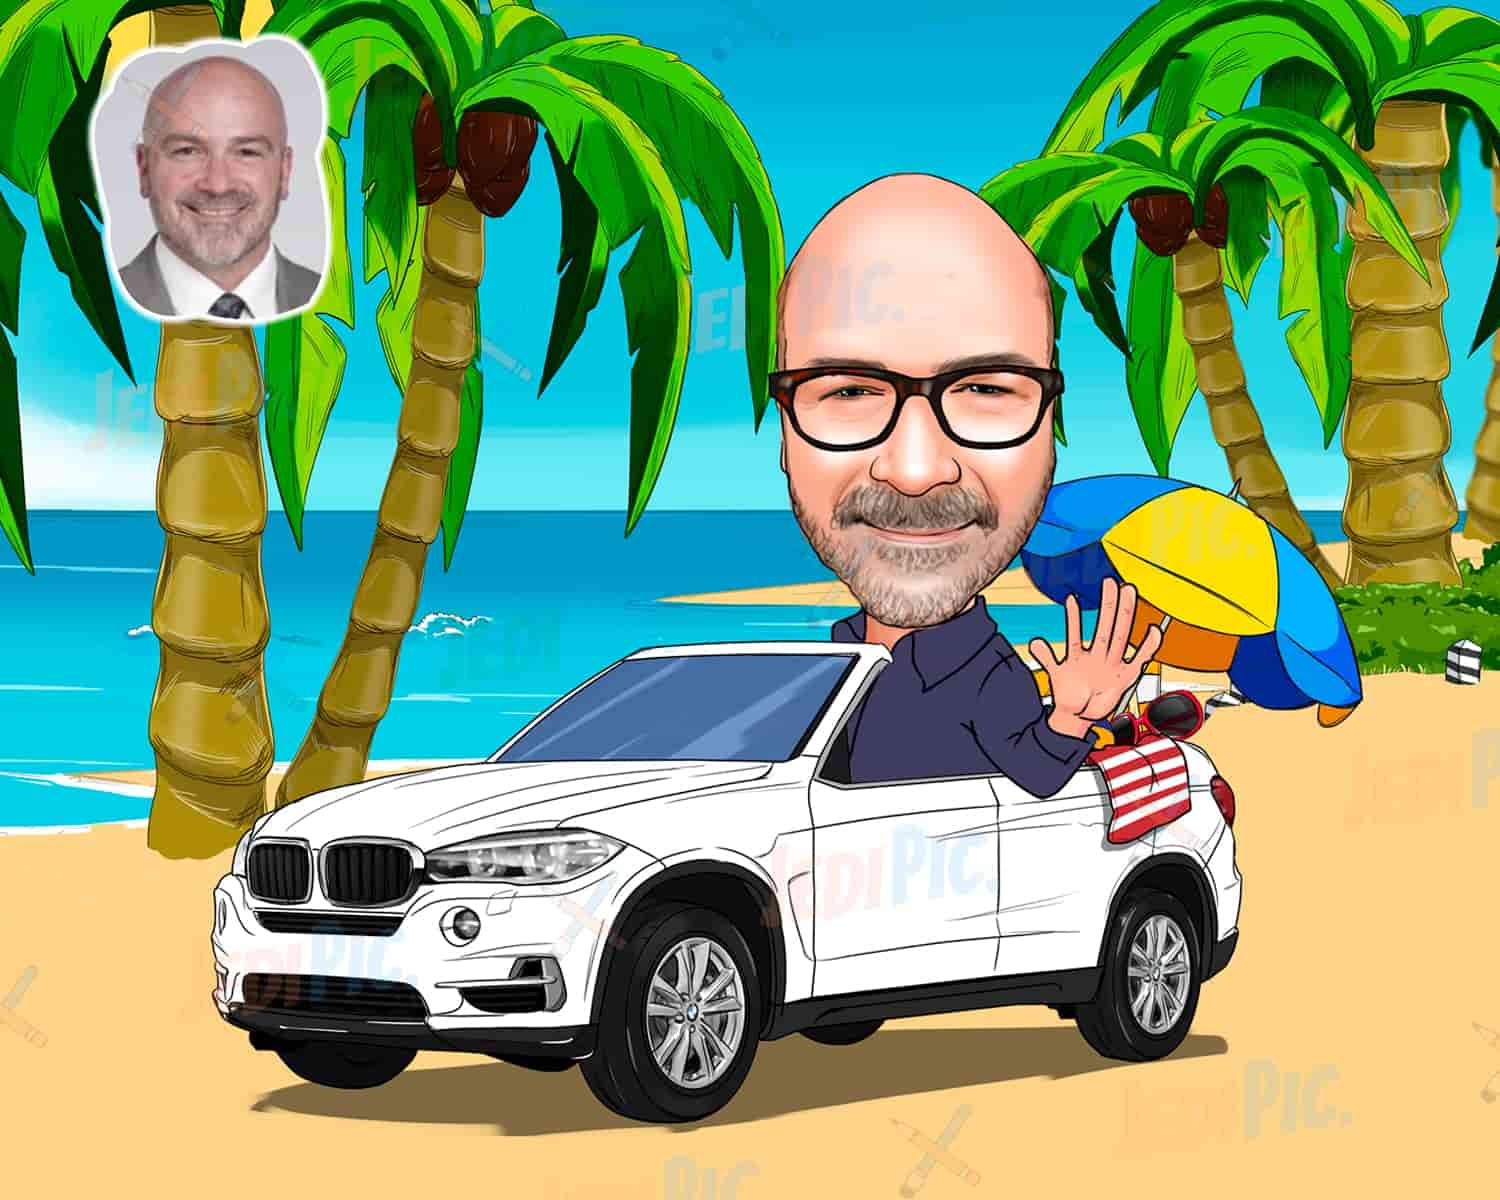 Person Riding Car - Going to Vacation Caricature in Colored Style